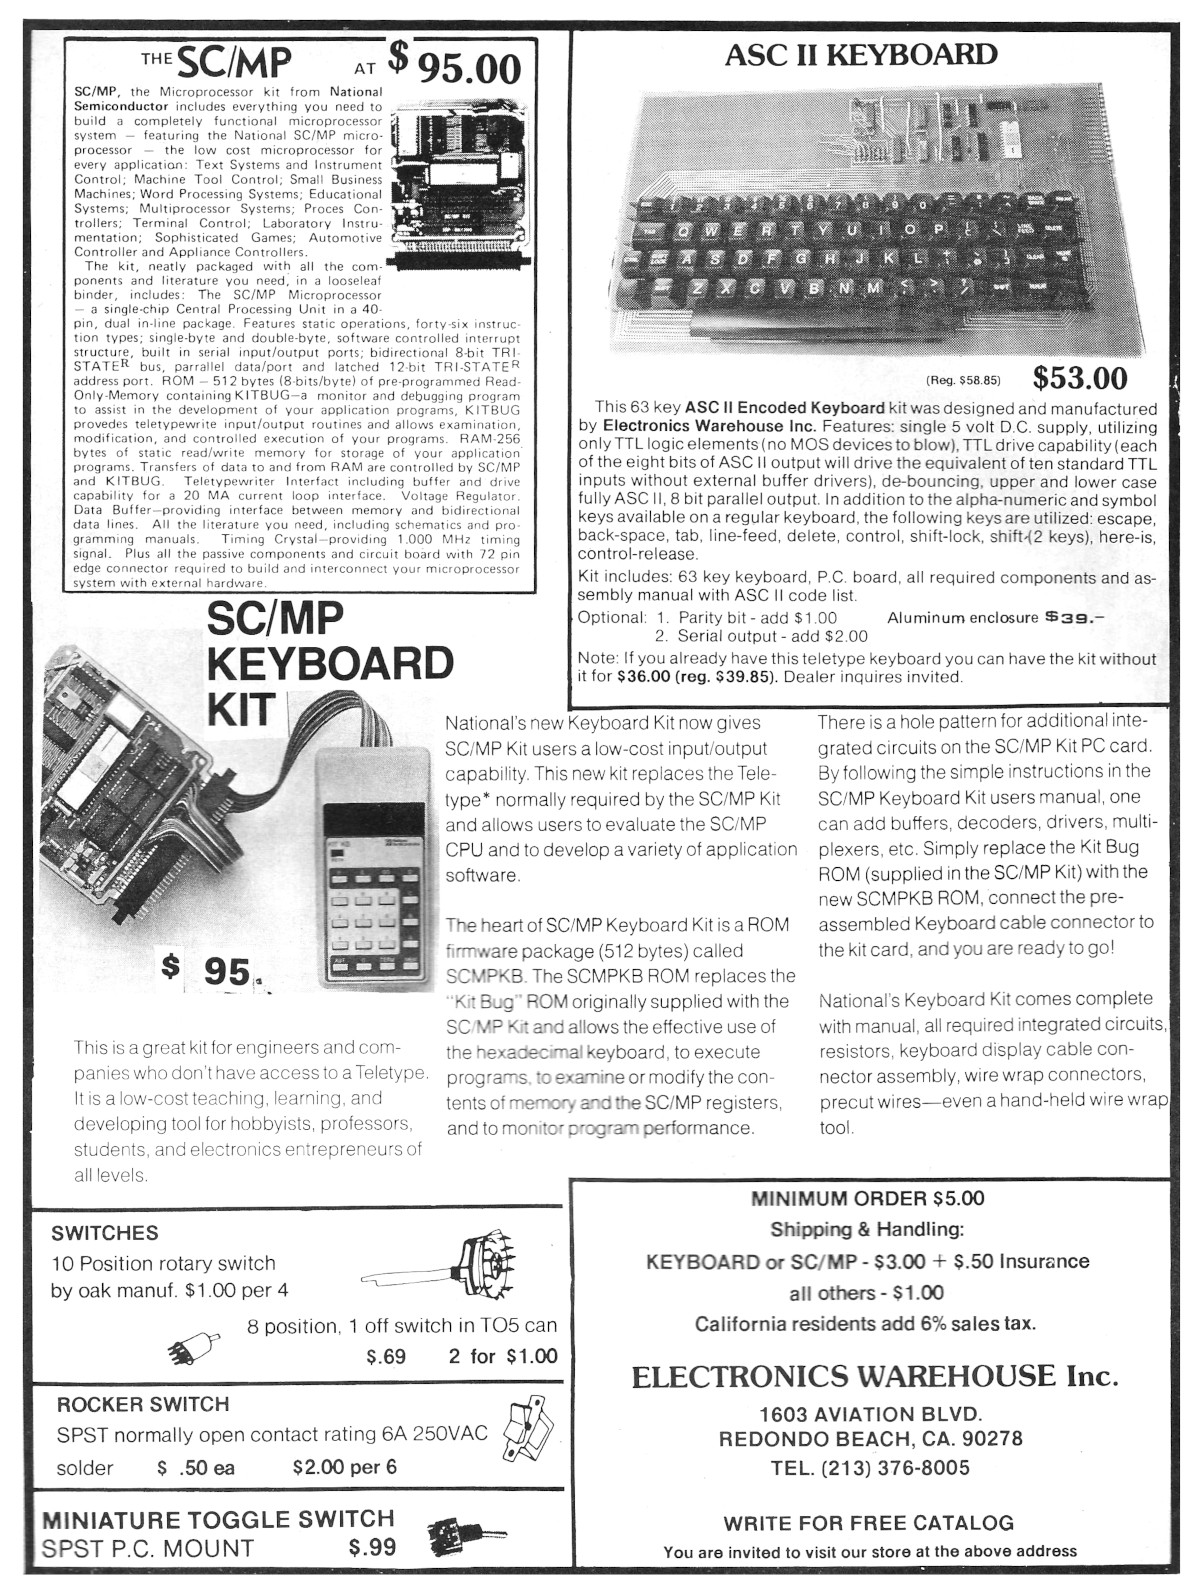 An advert from April 1977's Byte - The Small Systems Journal magazine showing National Semiconductors' SC/MP 